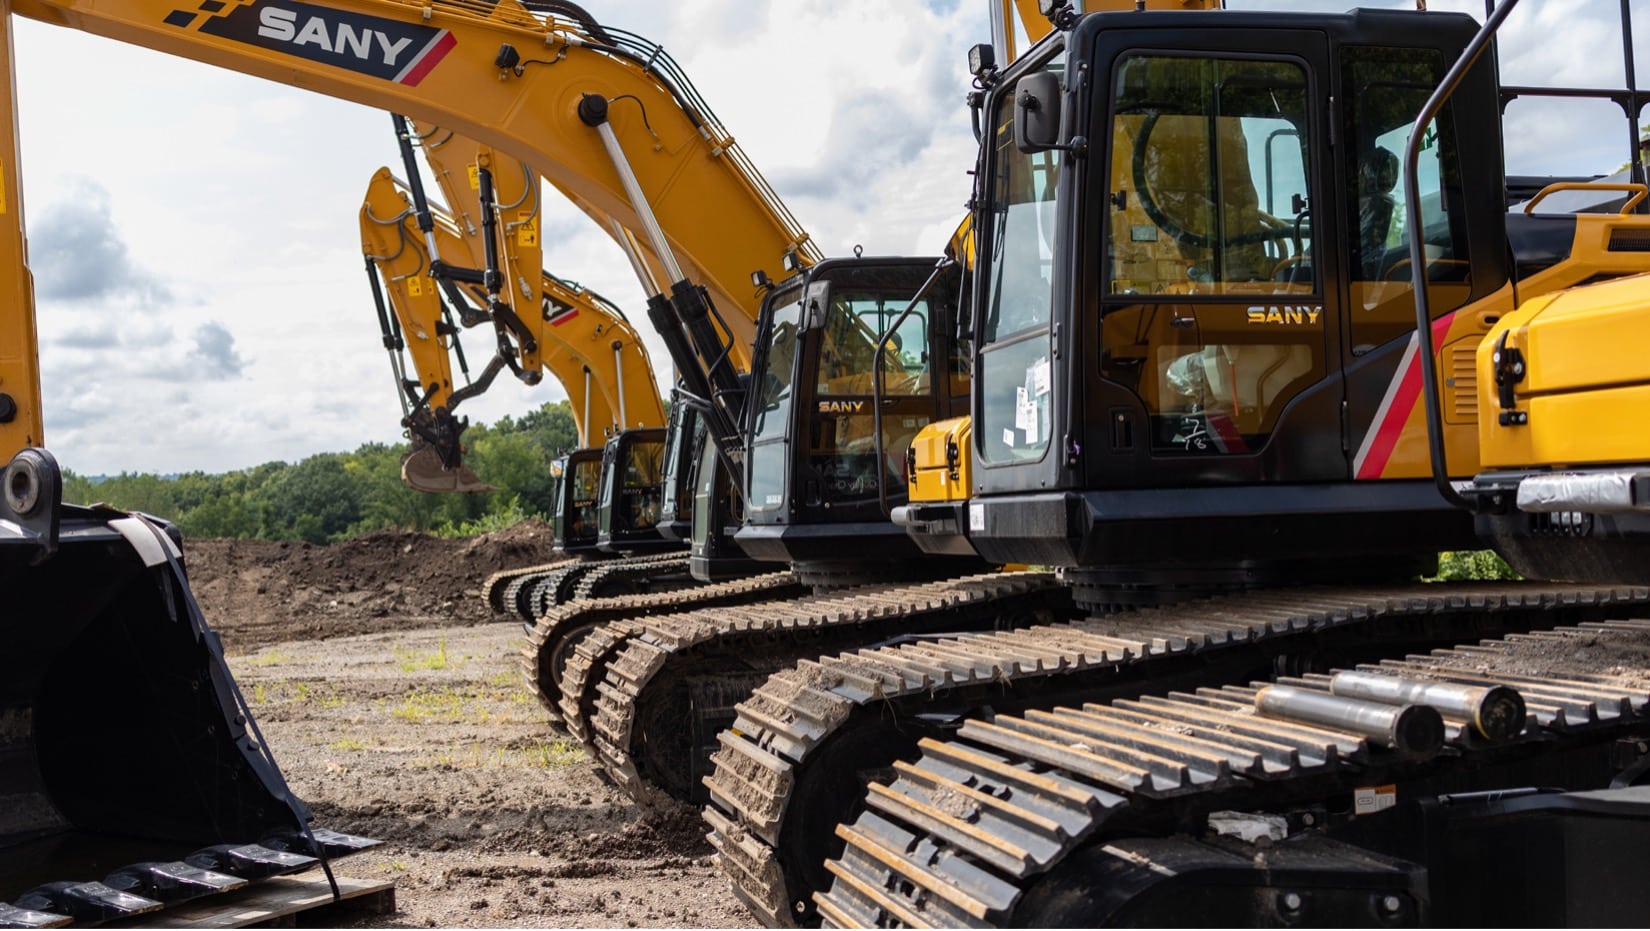 34 Tips to Maintain Hydraulic Systems on Your Heavy Construction Equipment